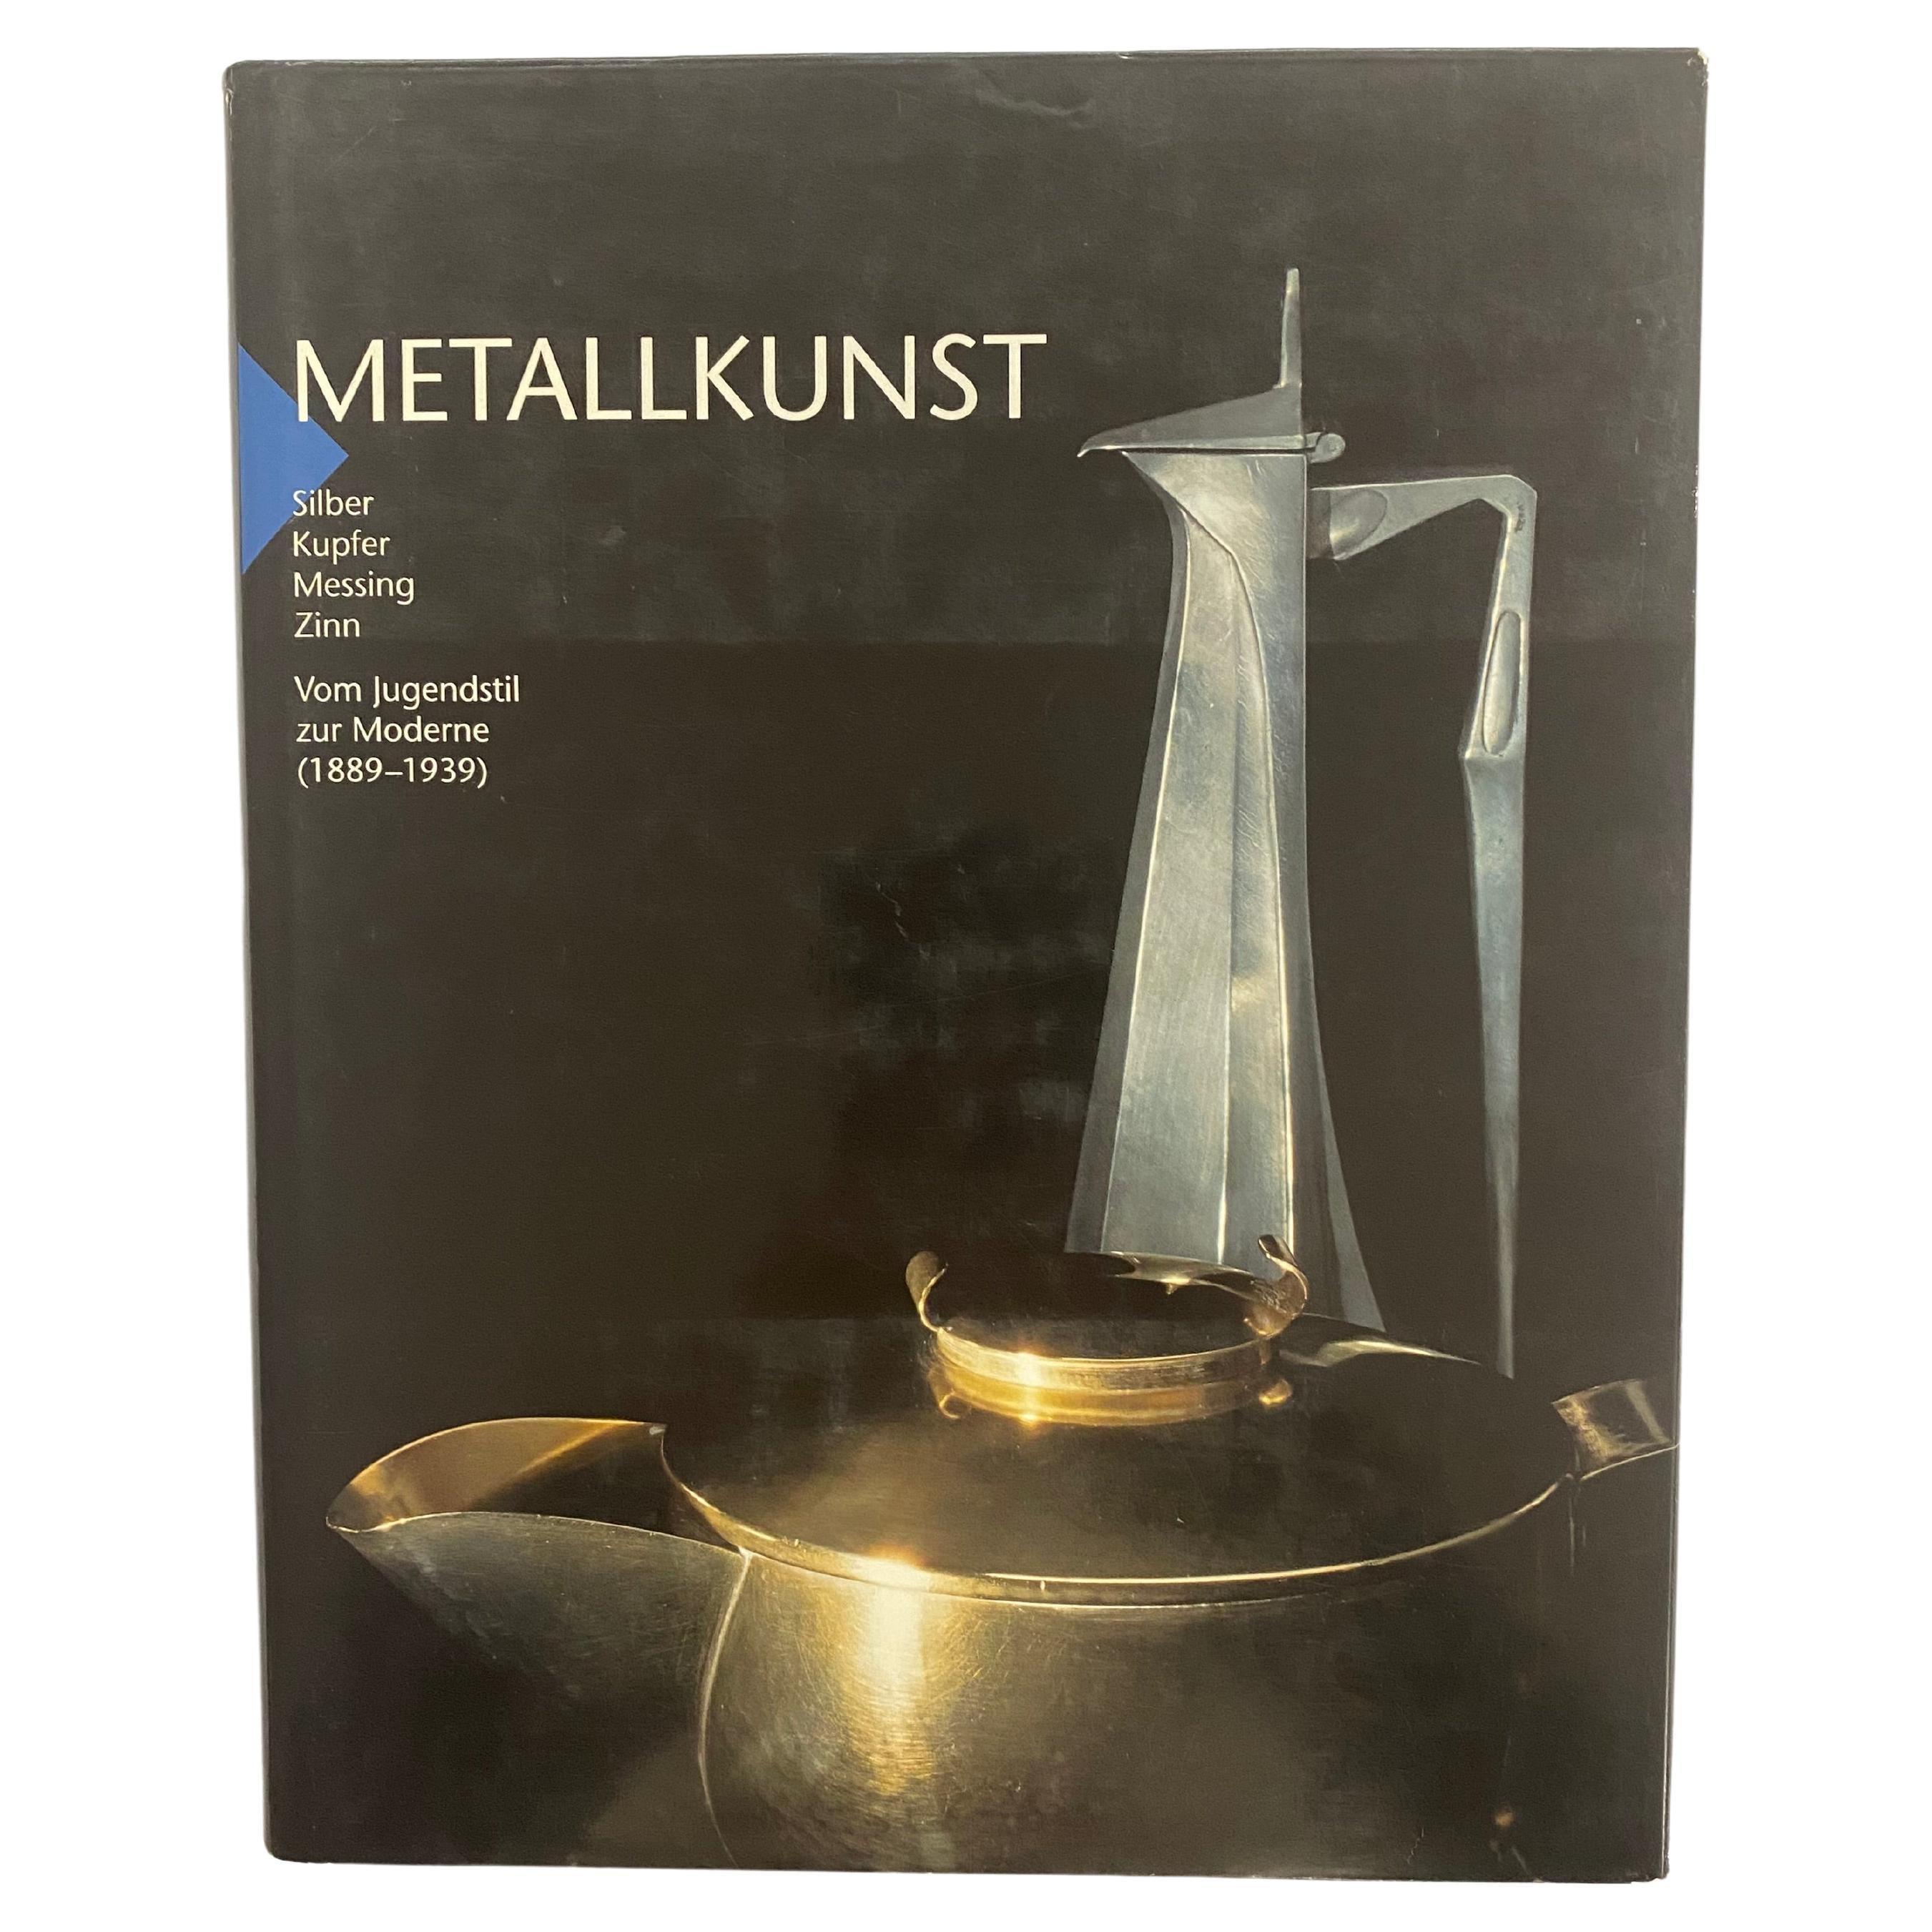 Metallkunst by Karl H. Brohan (Book) For Sale